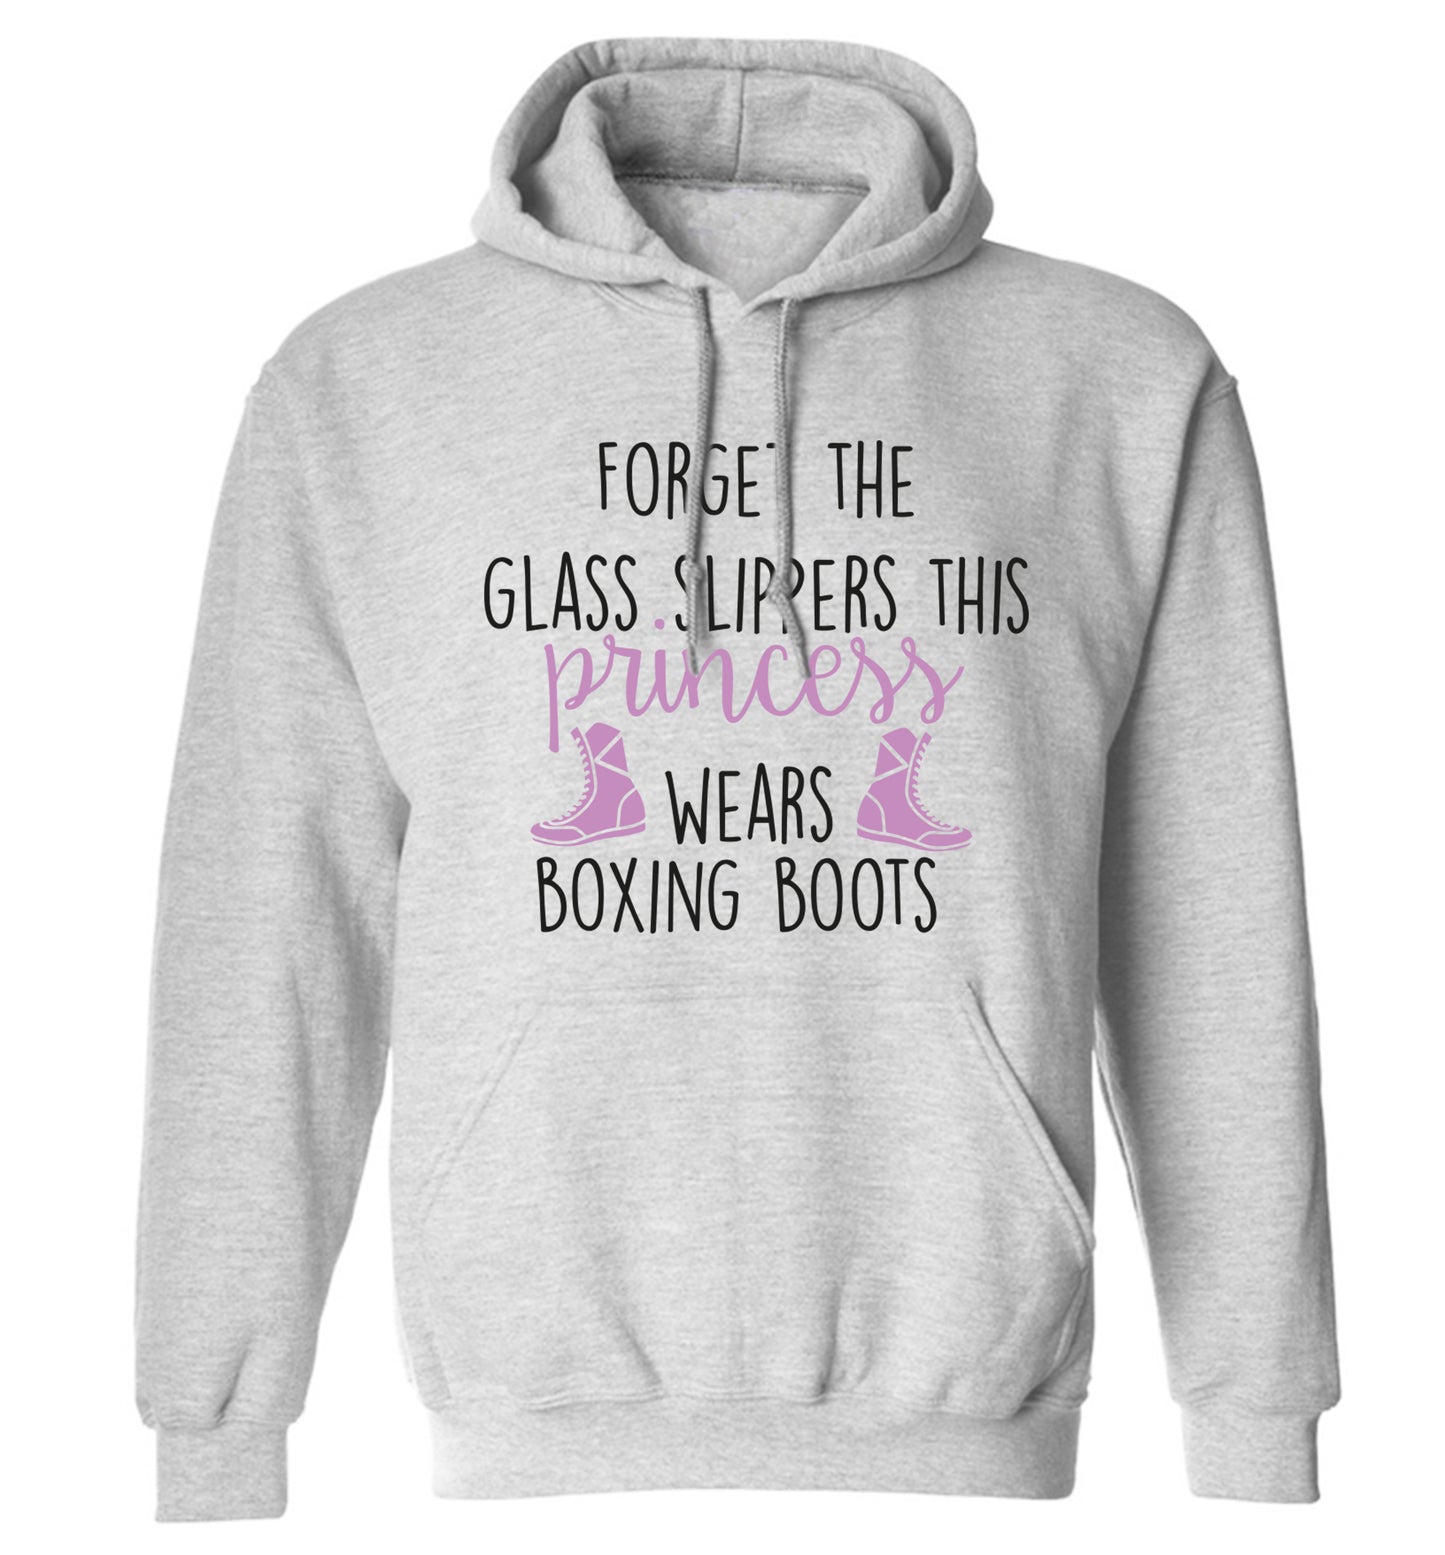 Forget the glass slippers this princess wears boxing boots adults unisex grey hoodie 2XL